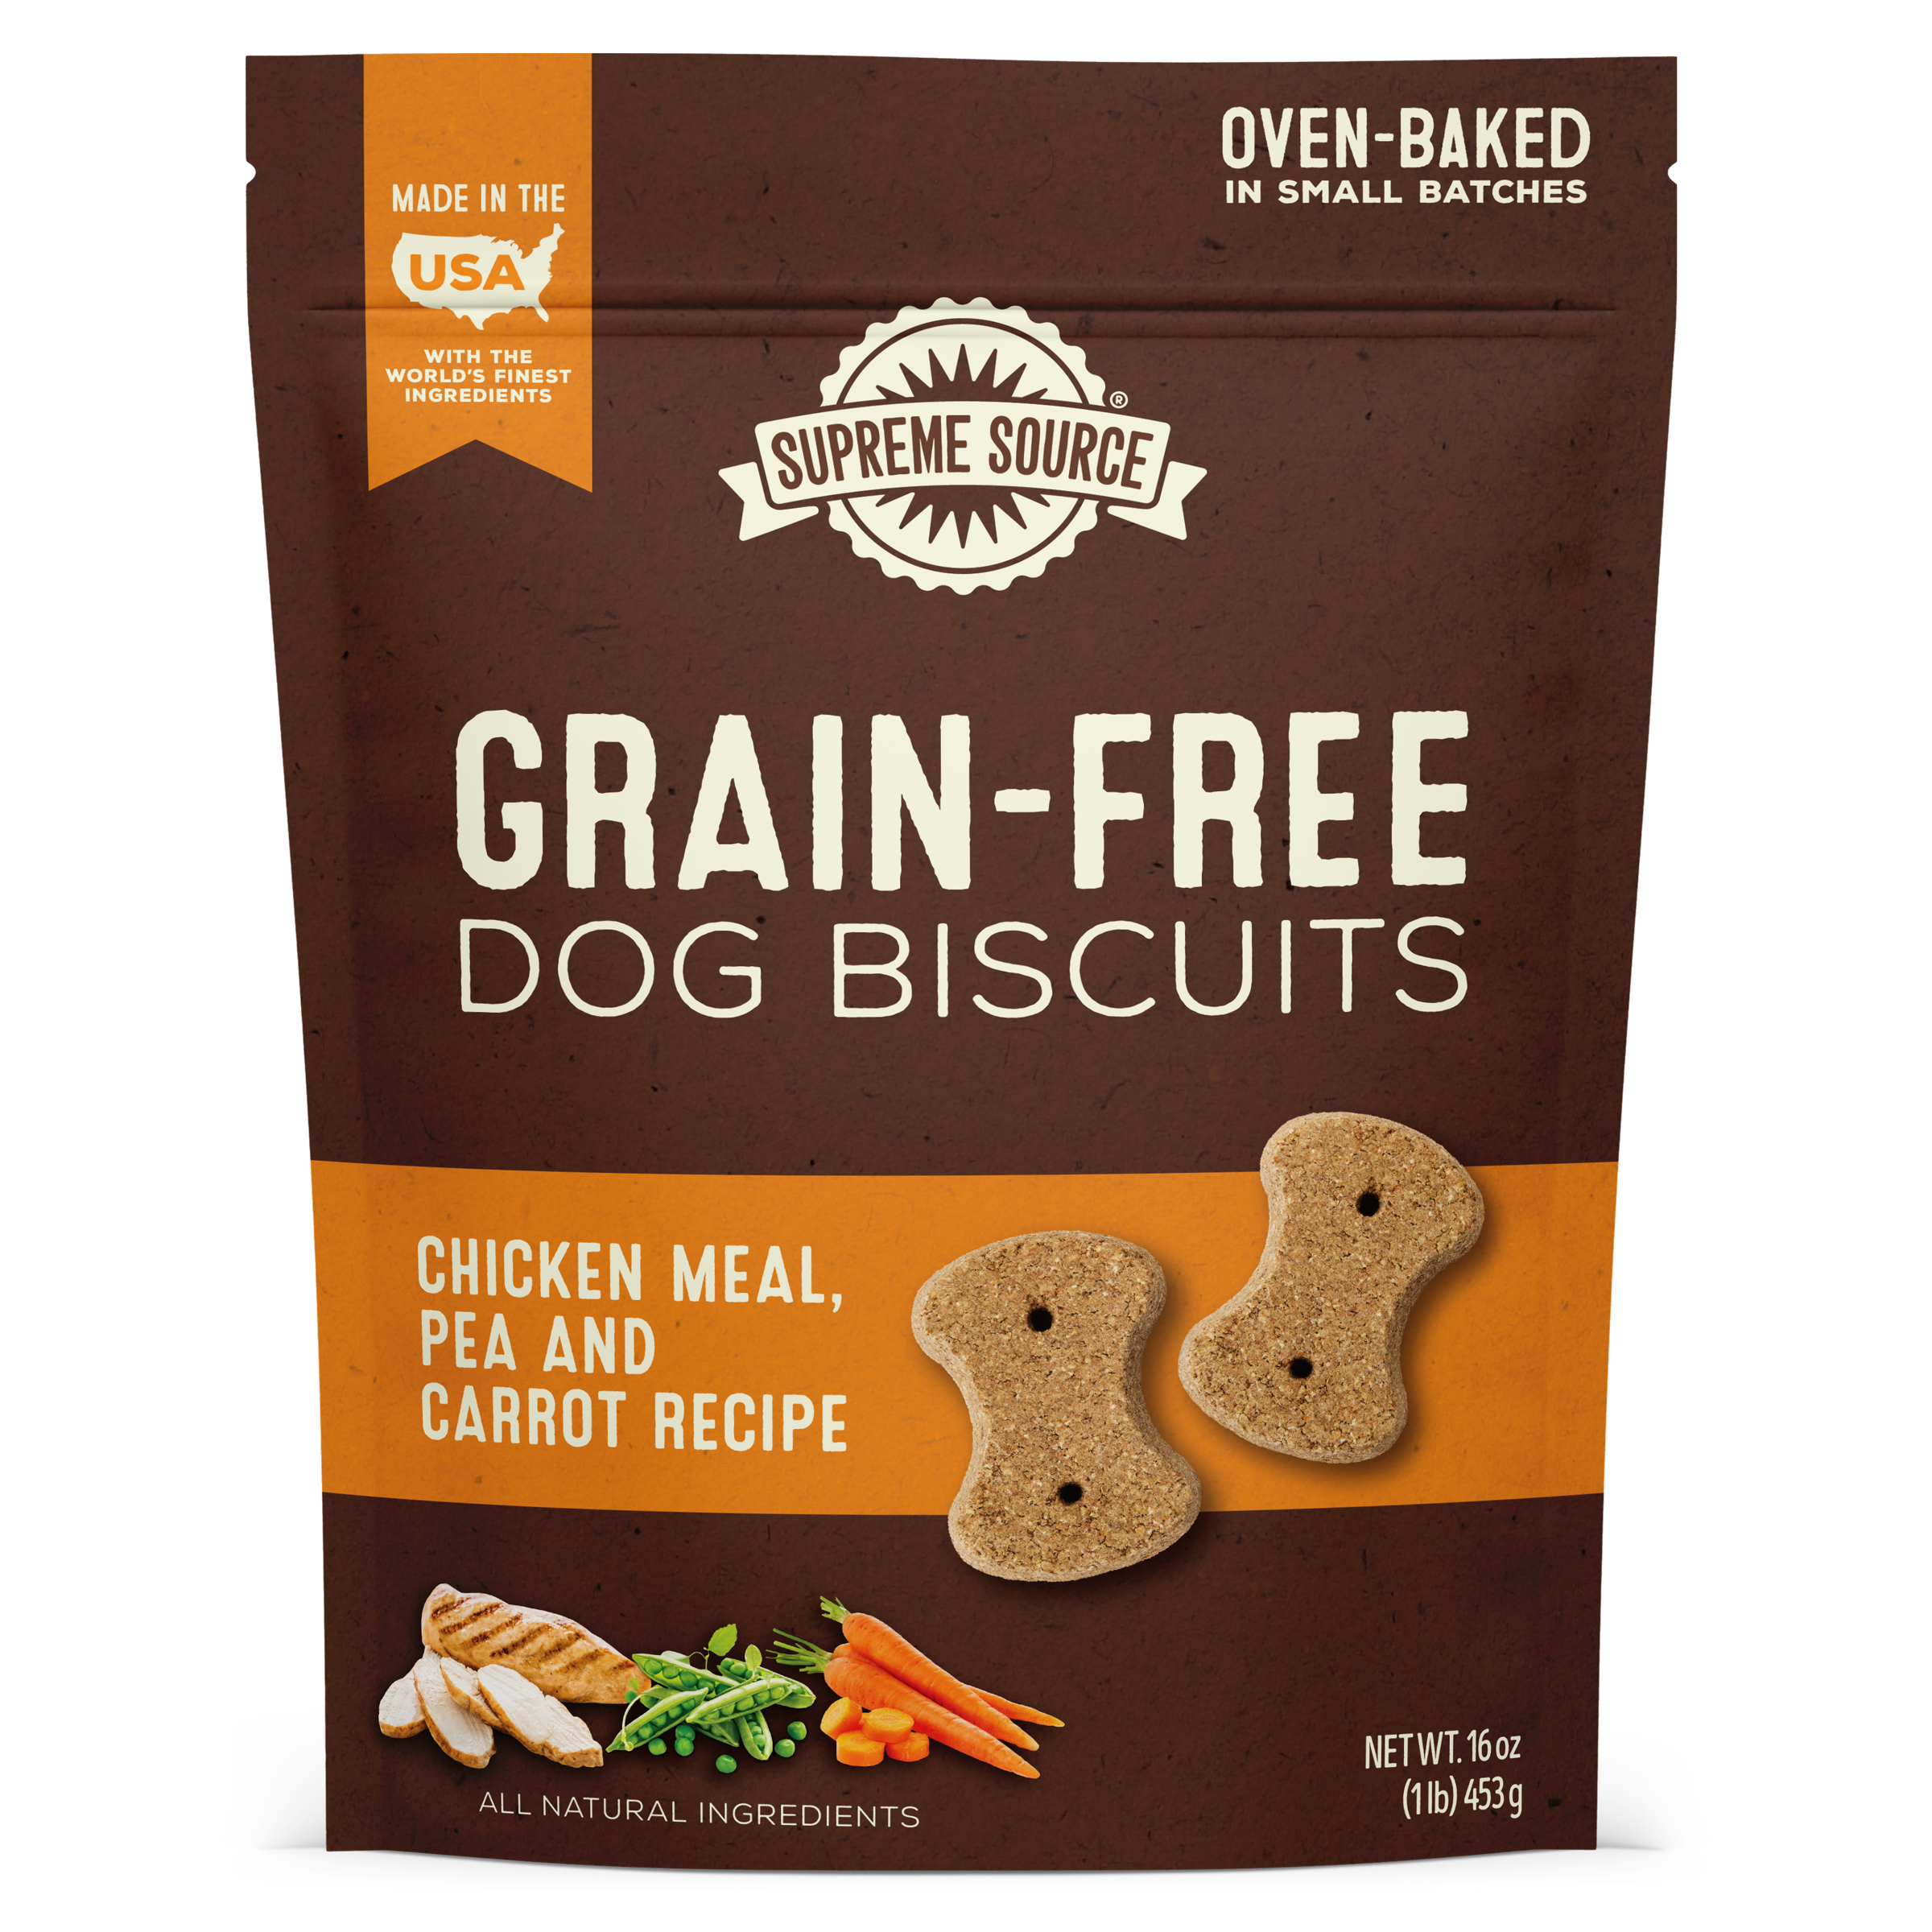 Chicken Meal, Pea & Carrot Recipe Dog Biscuits